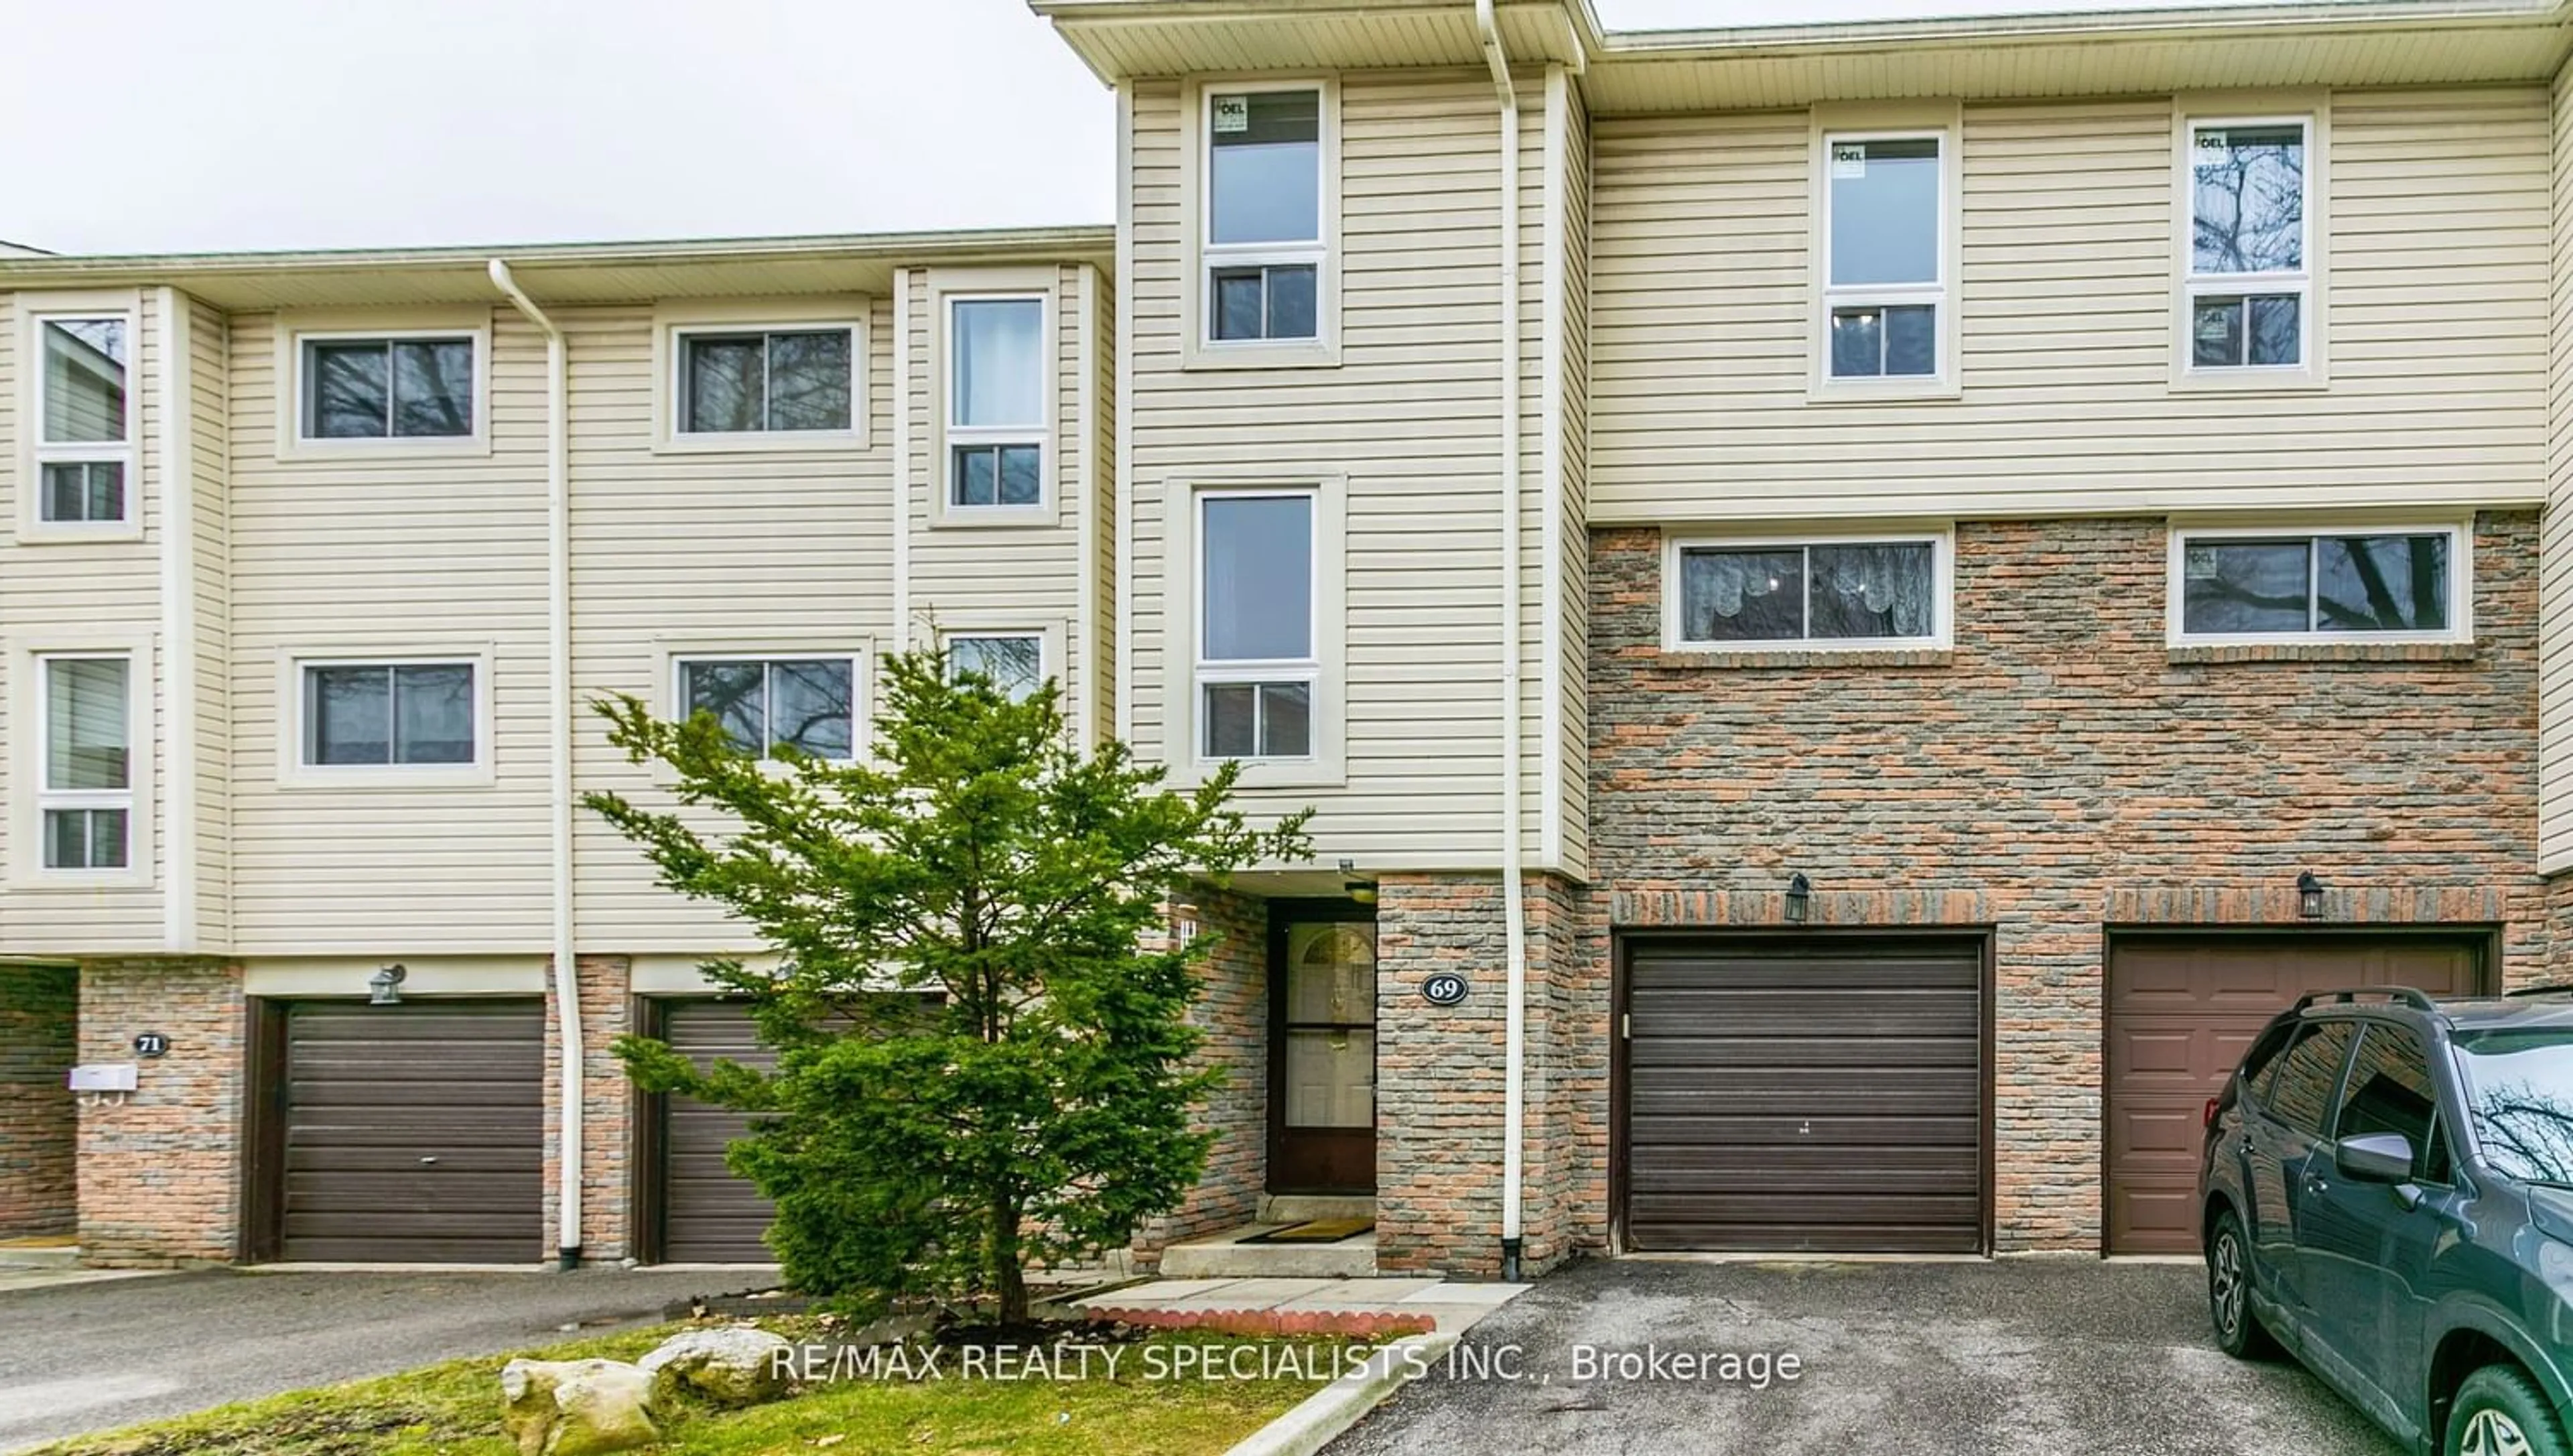 A pic from exterior of the house or condo for 7251 Copenhagen Rd #69, Mississauga Ontario L5N 2H6